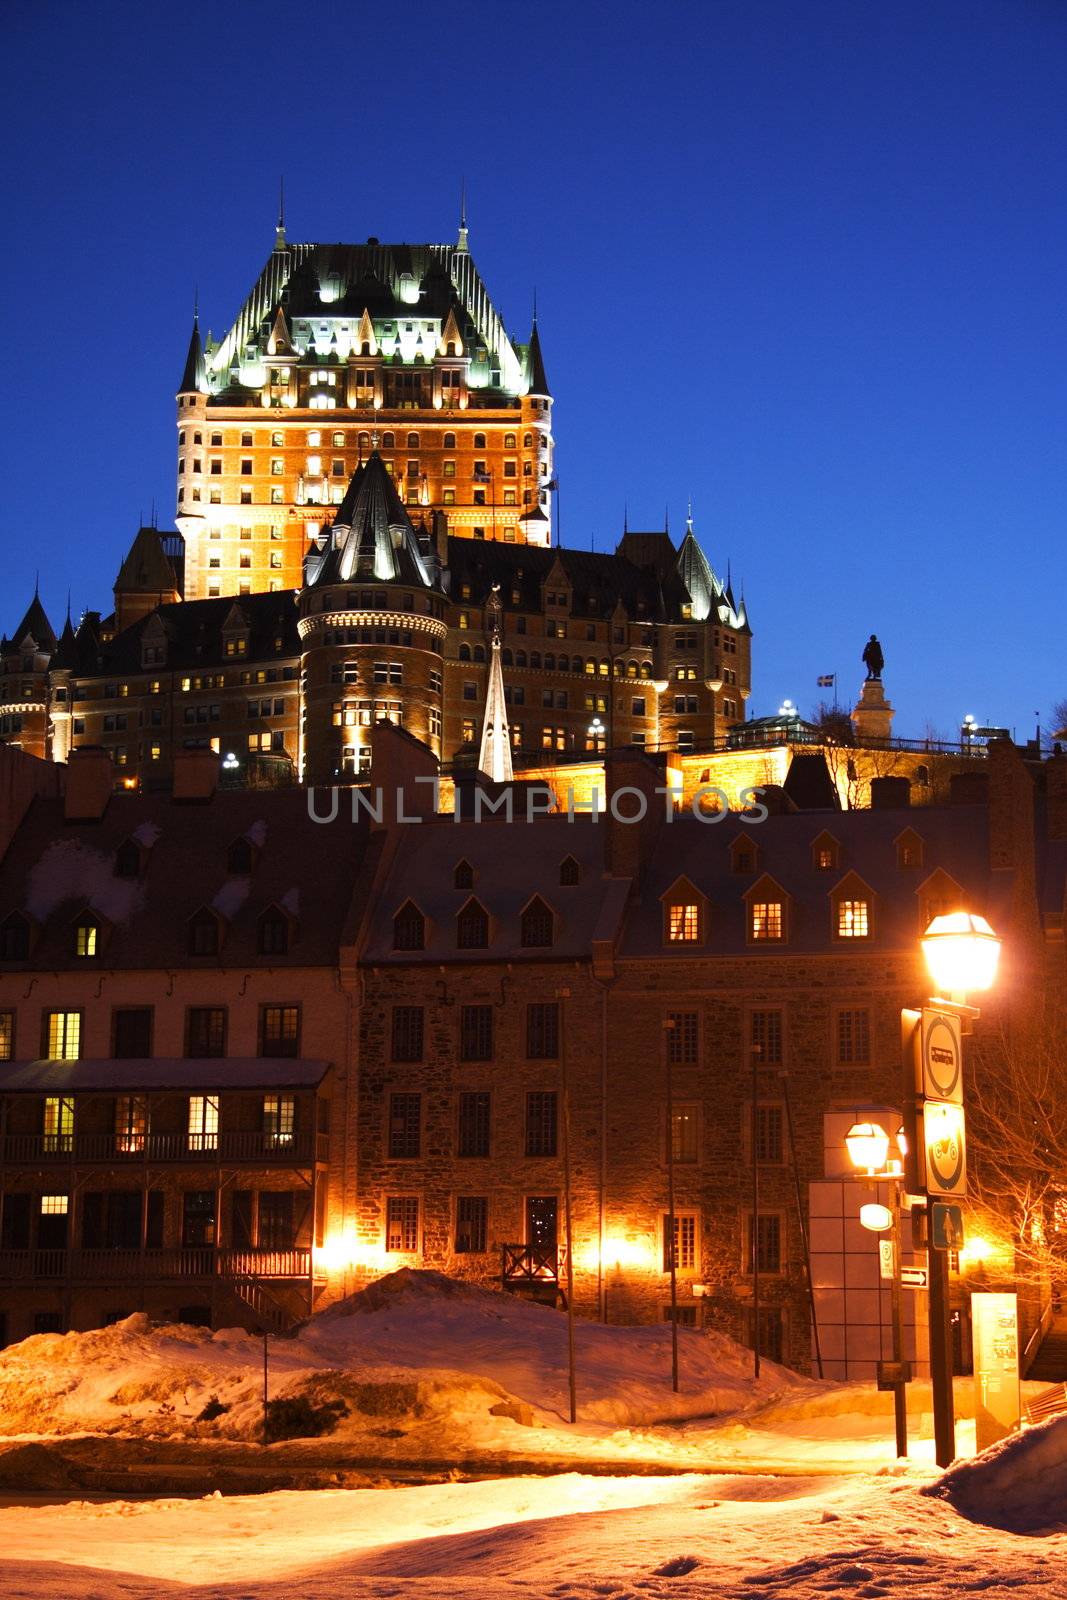 Quebec City night scene with Chateau Frontenac